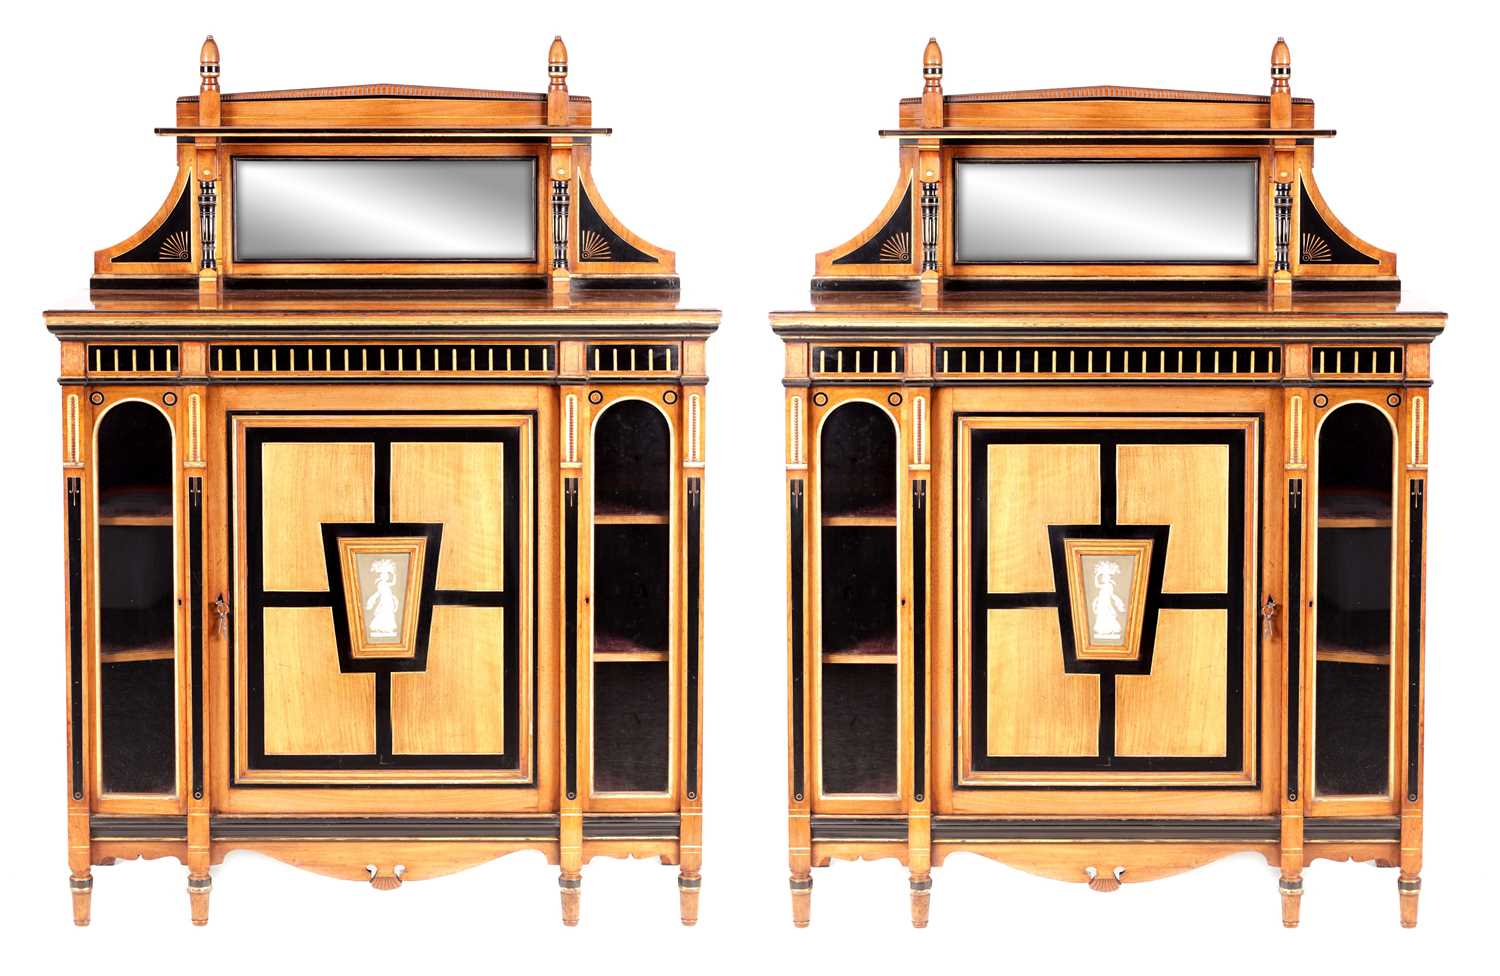 Lot 1000 - LAMB, MANCHESTER  A PAIR OF LATE 19TH CENTURY AESTHETIC EBONISED AND GILT FIGURED WALNUT SIDE CABINETS